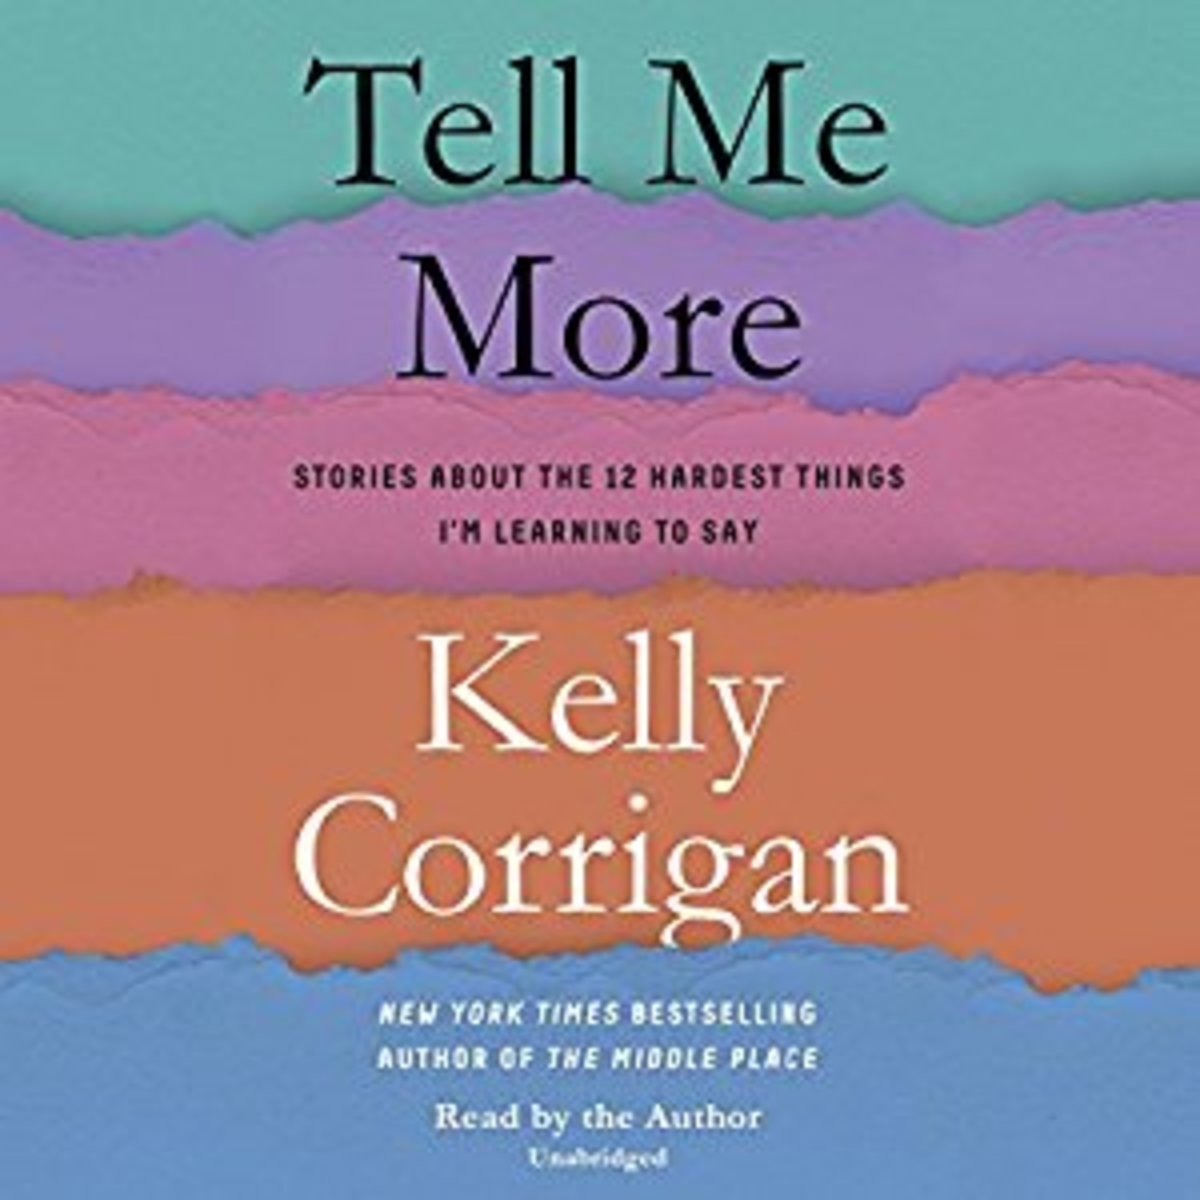                                                                                    Tell Me More by Kelly Corrigan 